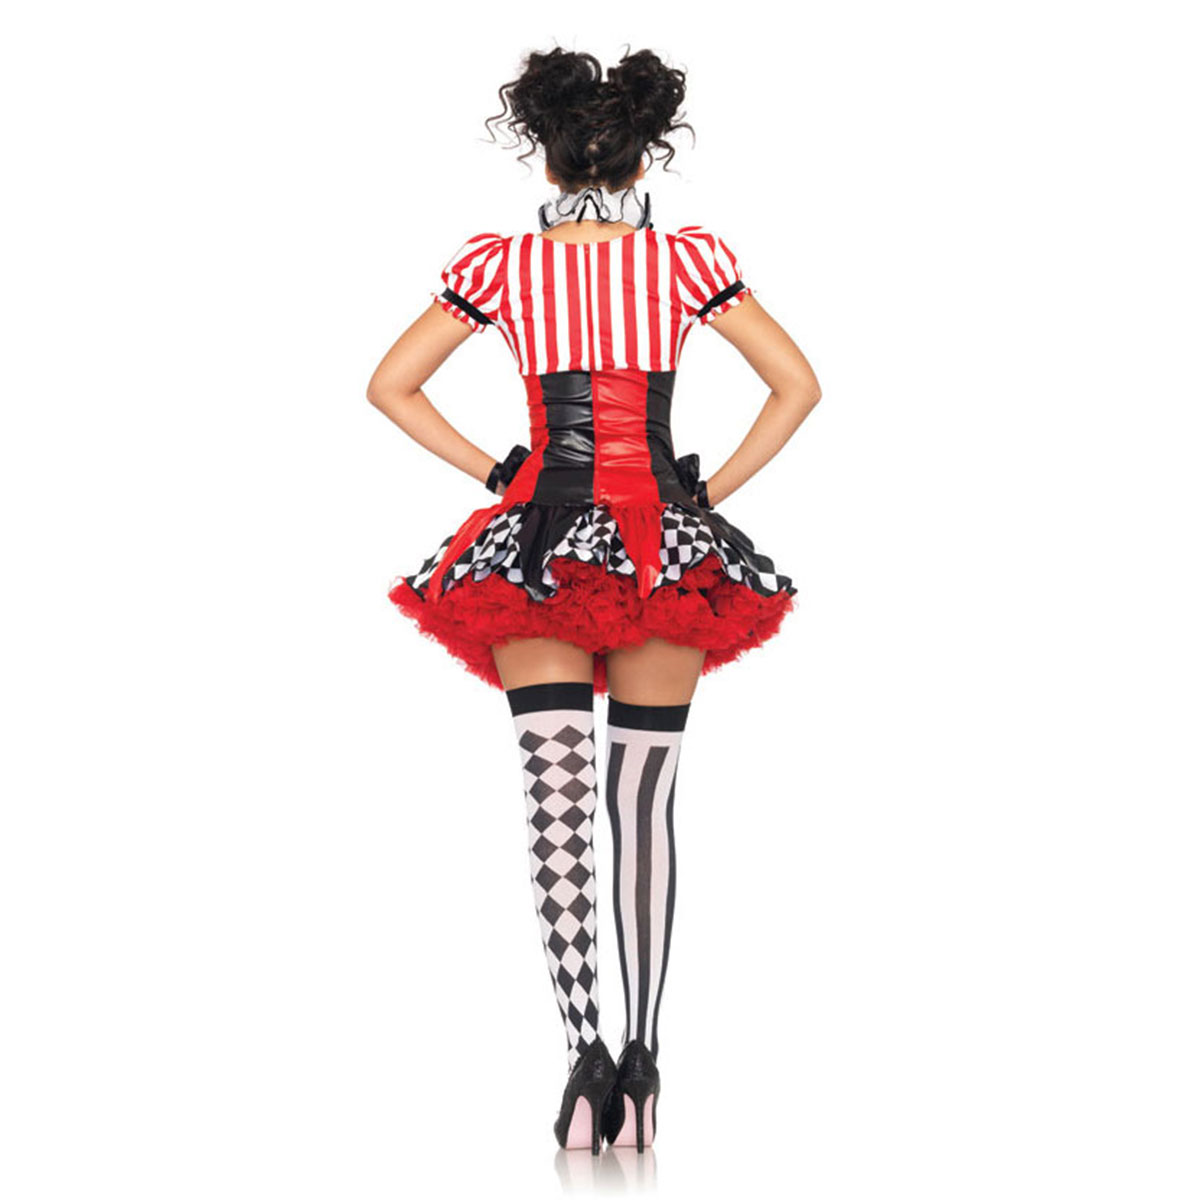 Sexy Le Belle Harlequin Circus Clown Gras Womens Adult Halloween Costume Large Ebay 9681